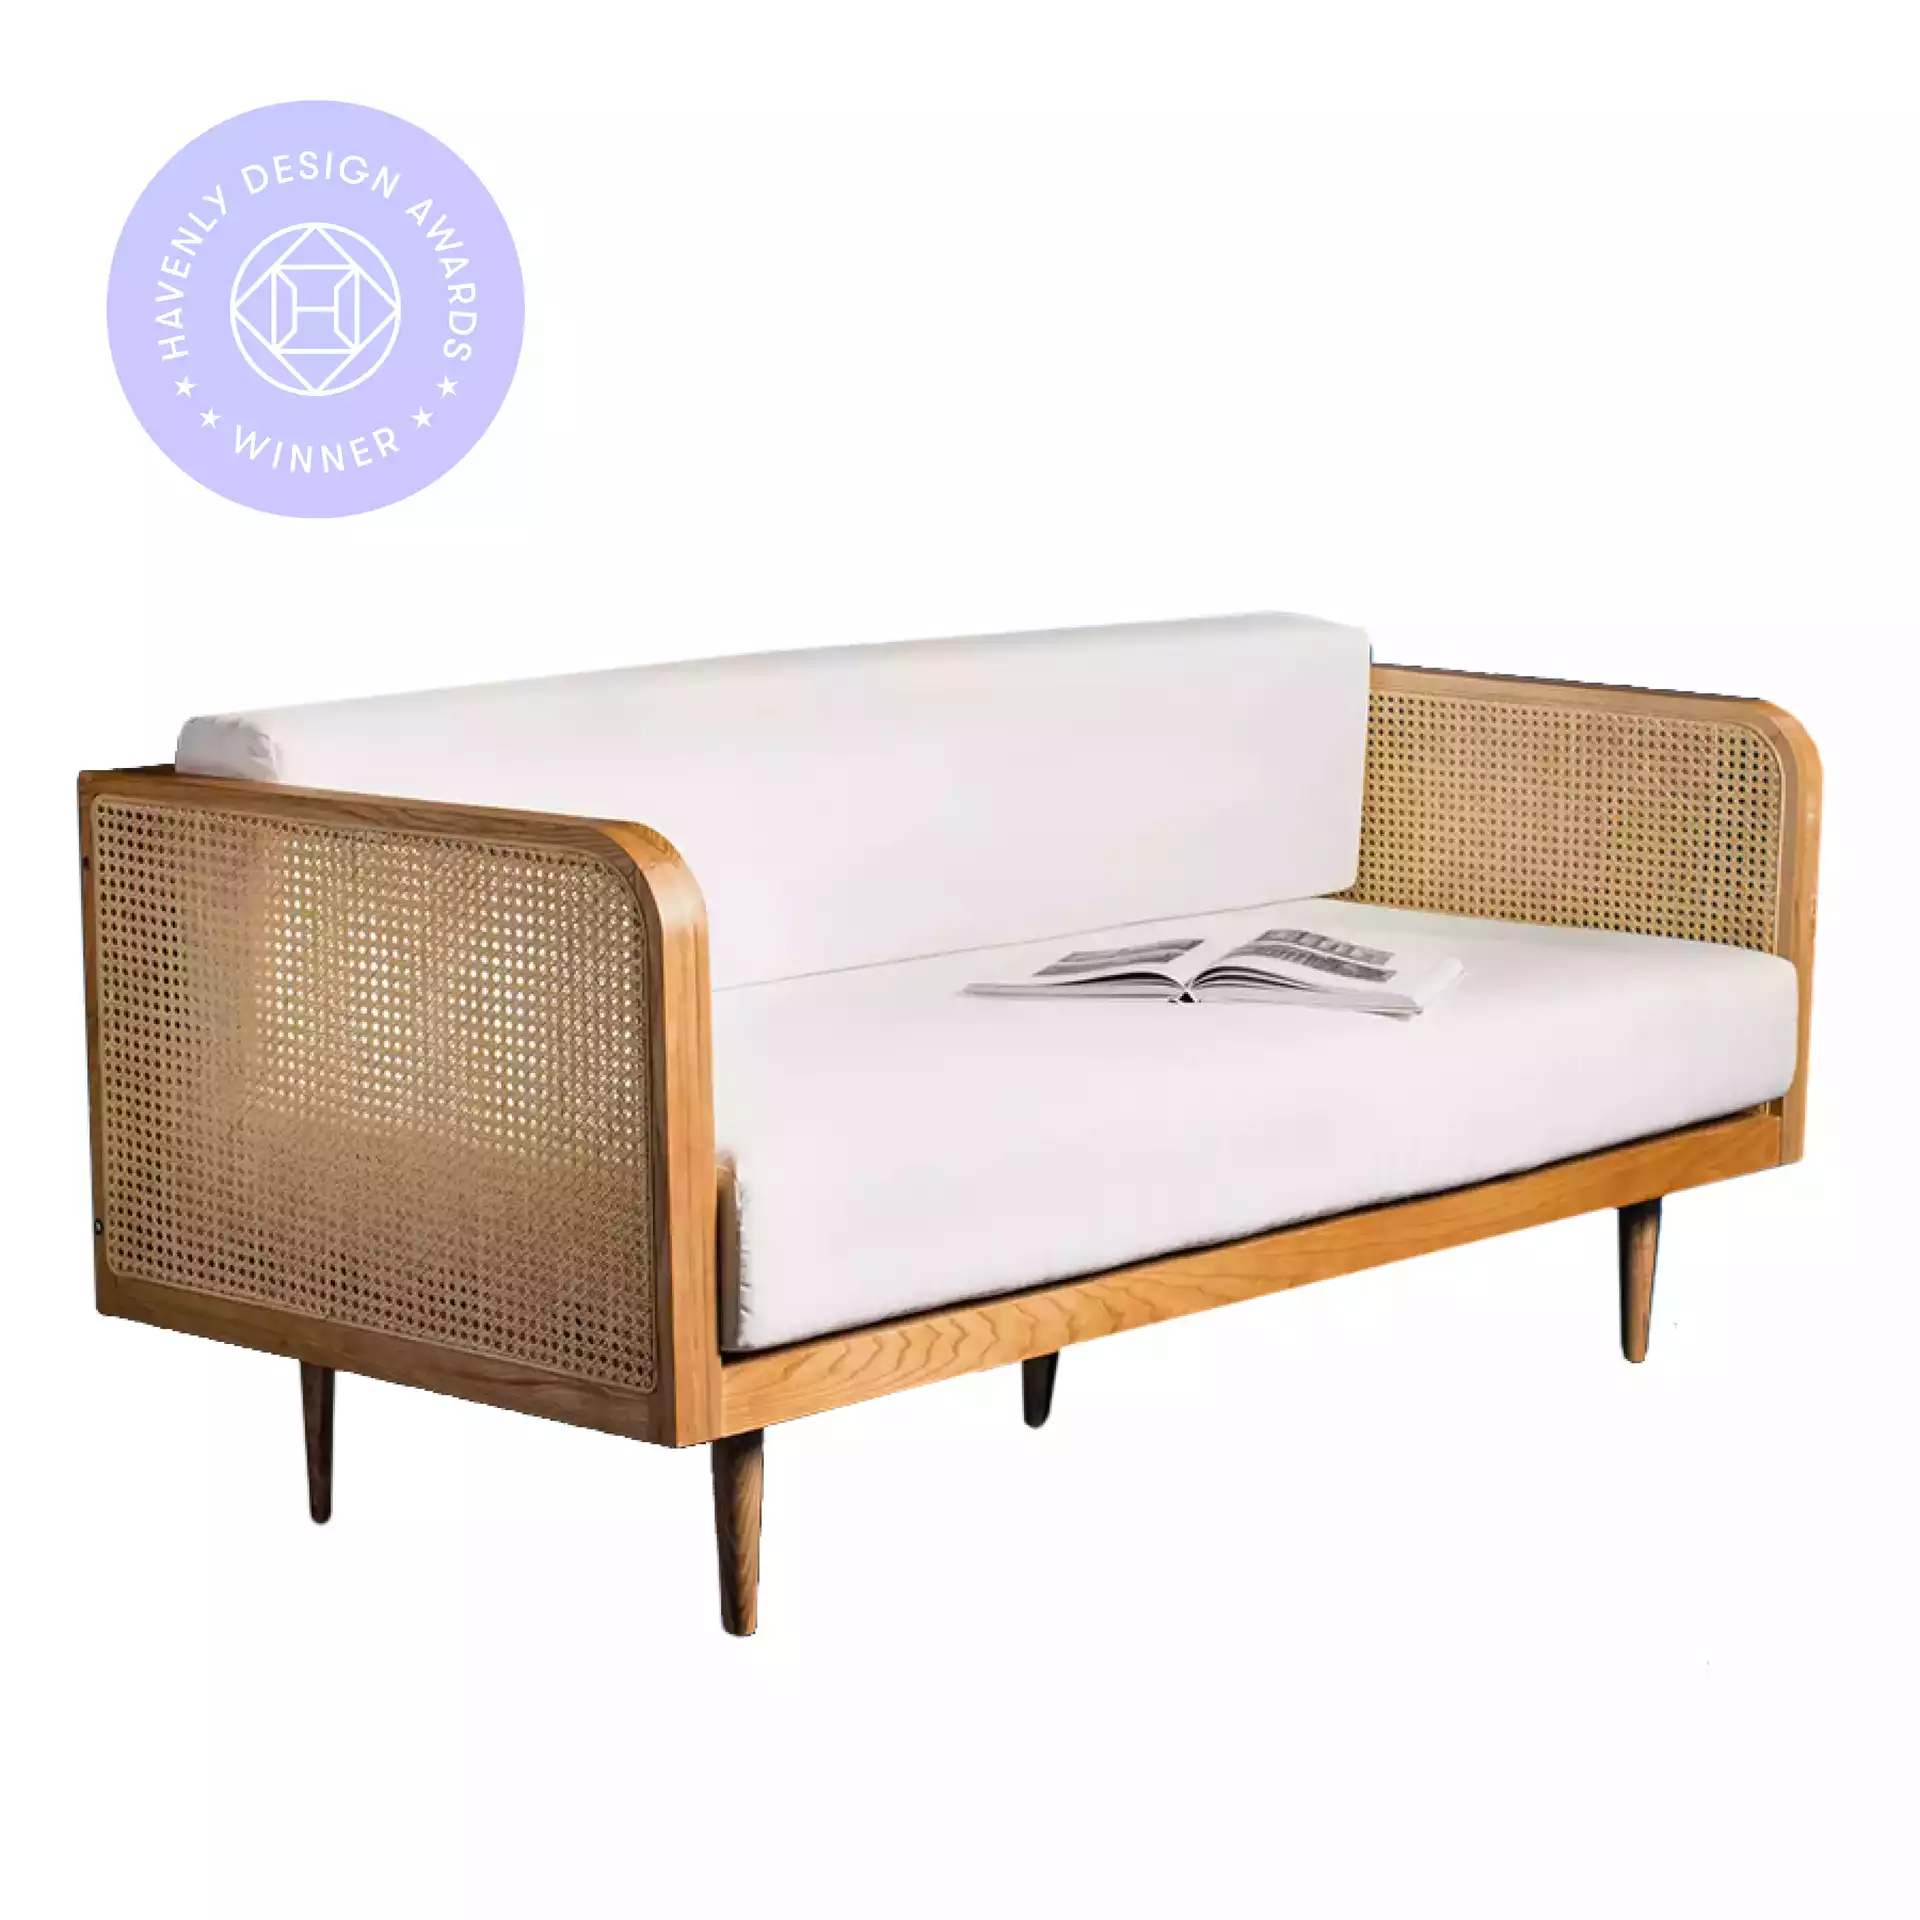 Fillmore Cane Daybed, Ivory Linen